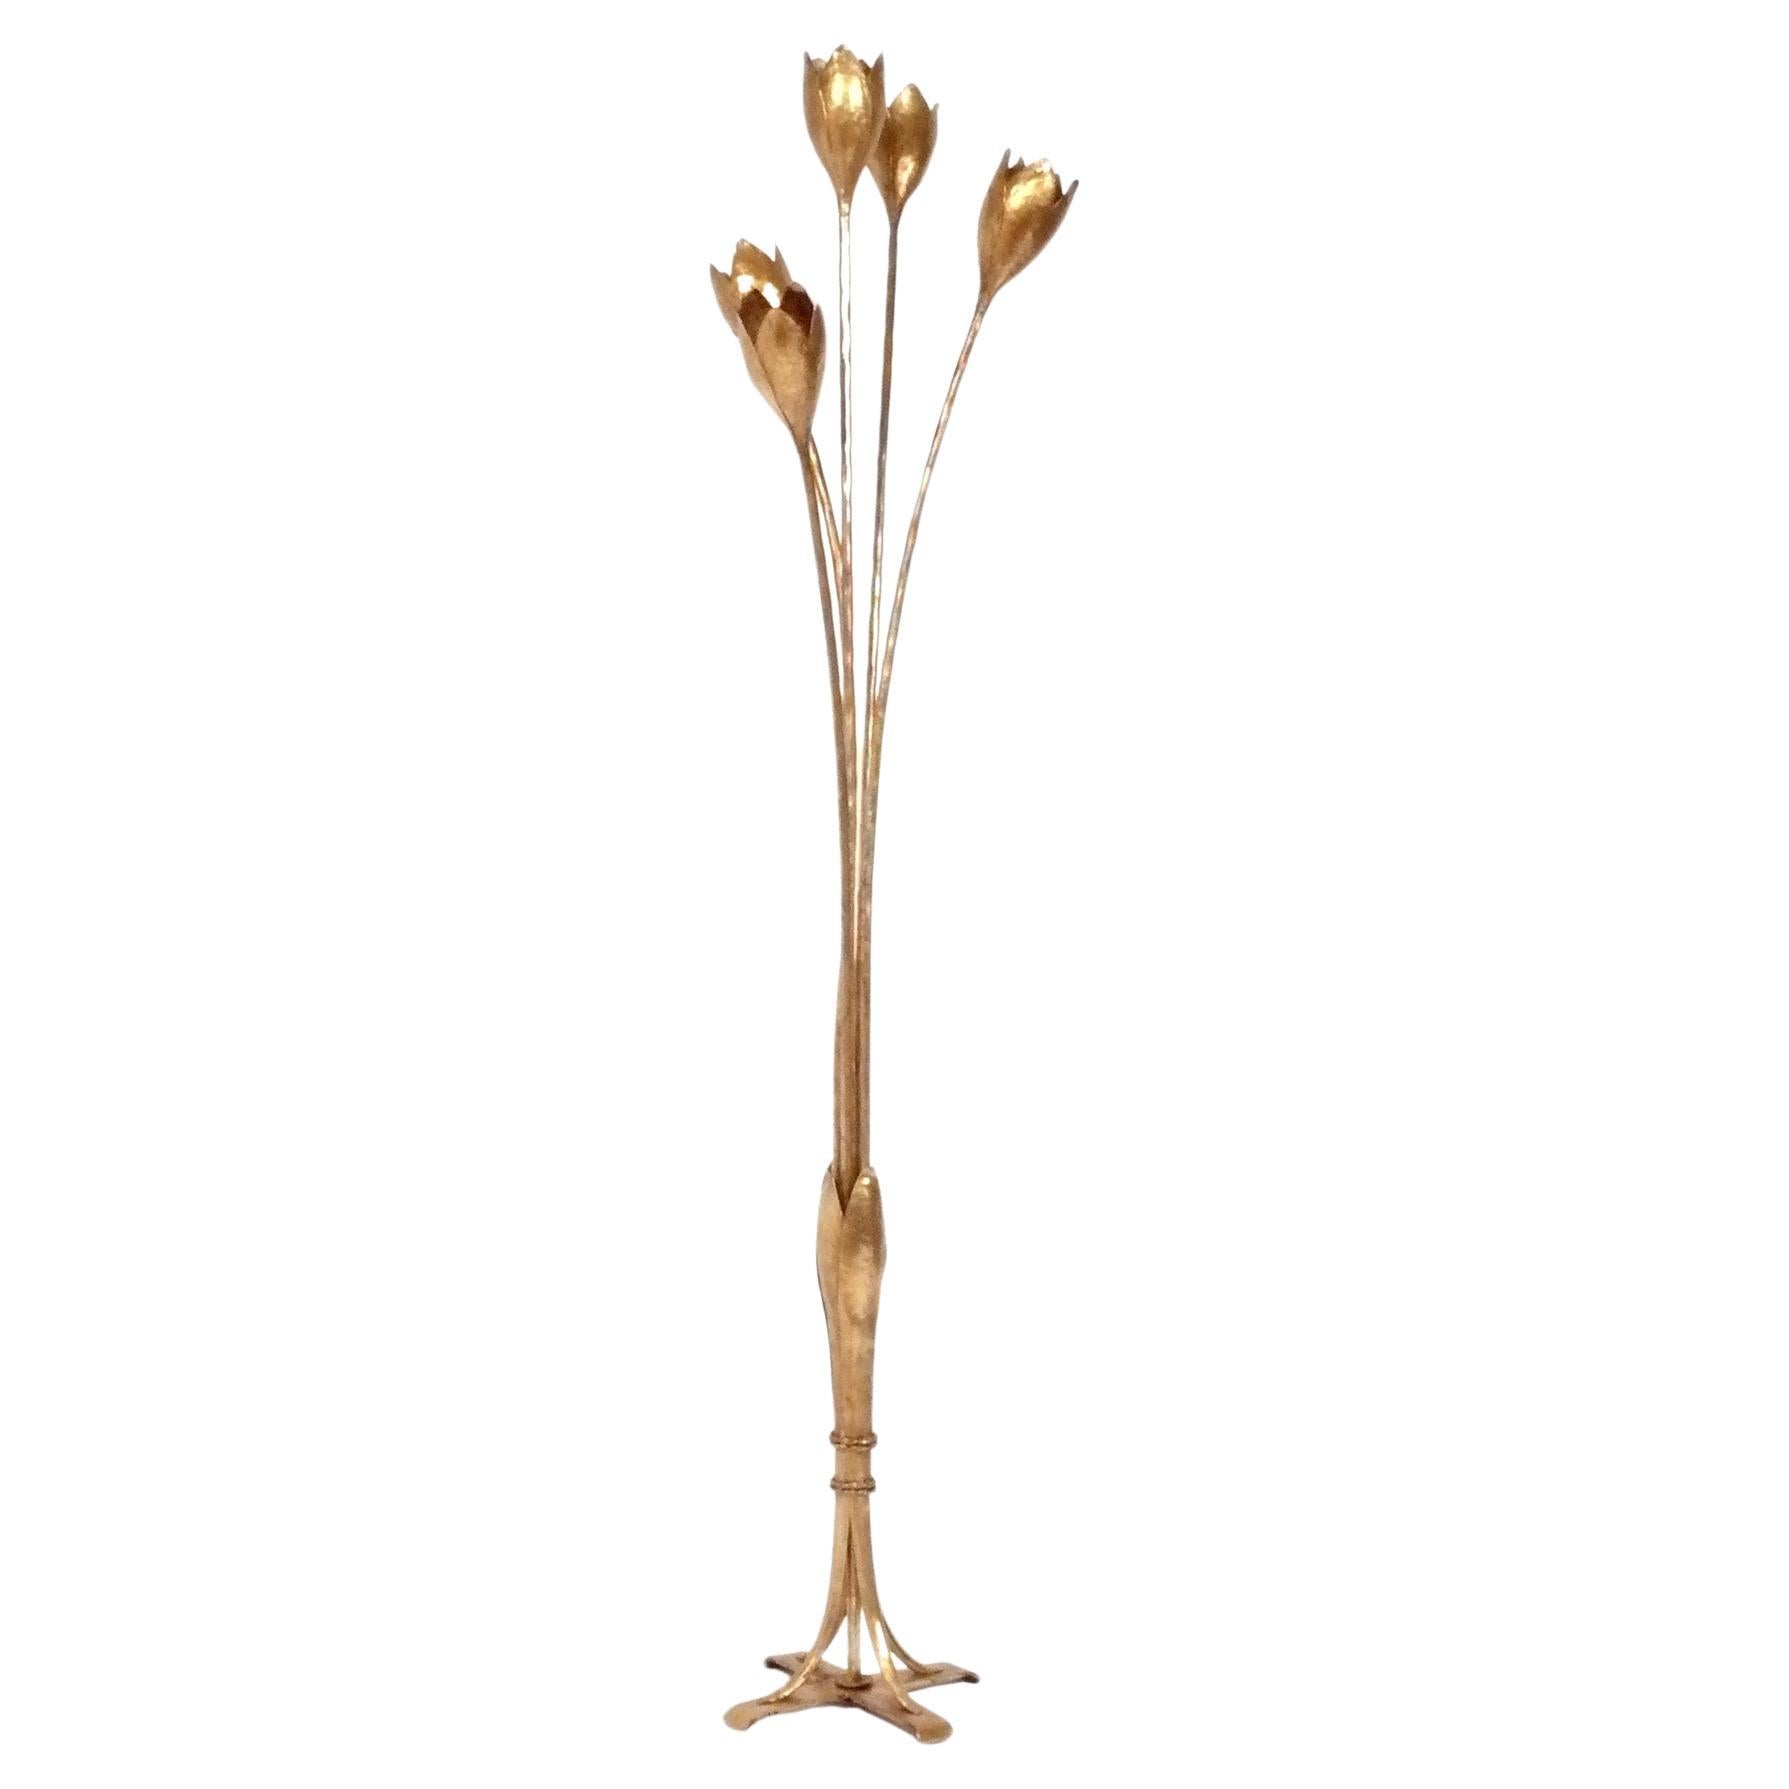 1940s French Floriform Gilt Metal Floor Lamp attributed to Maison Bagues